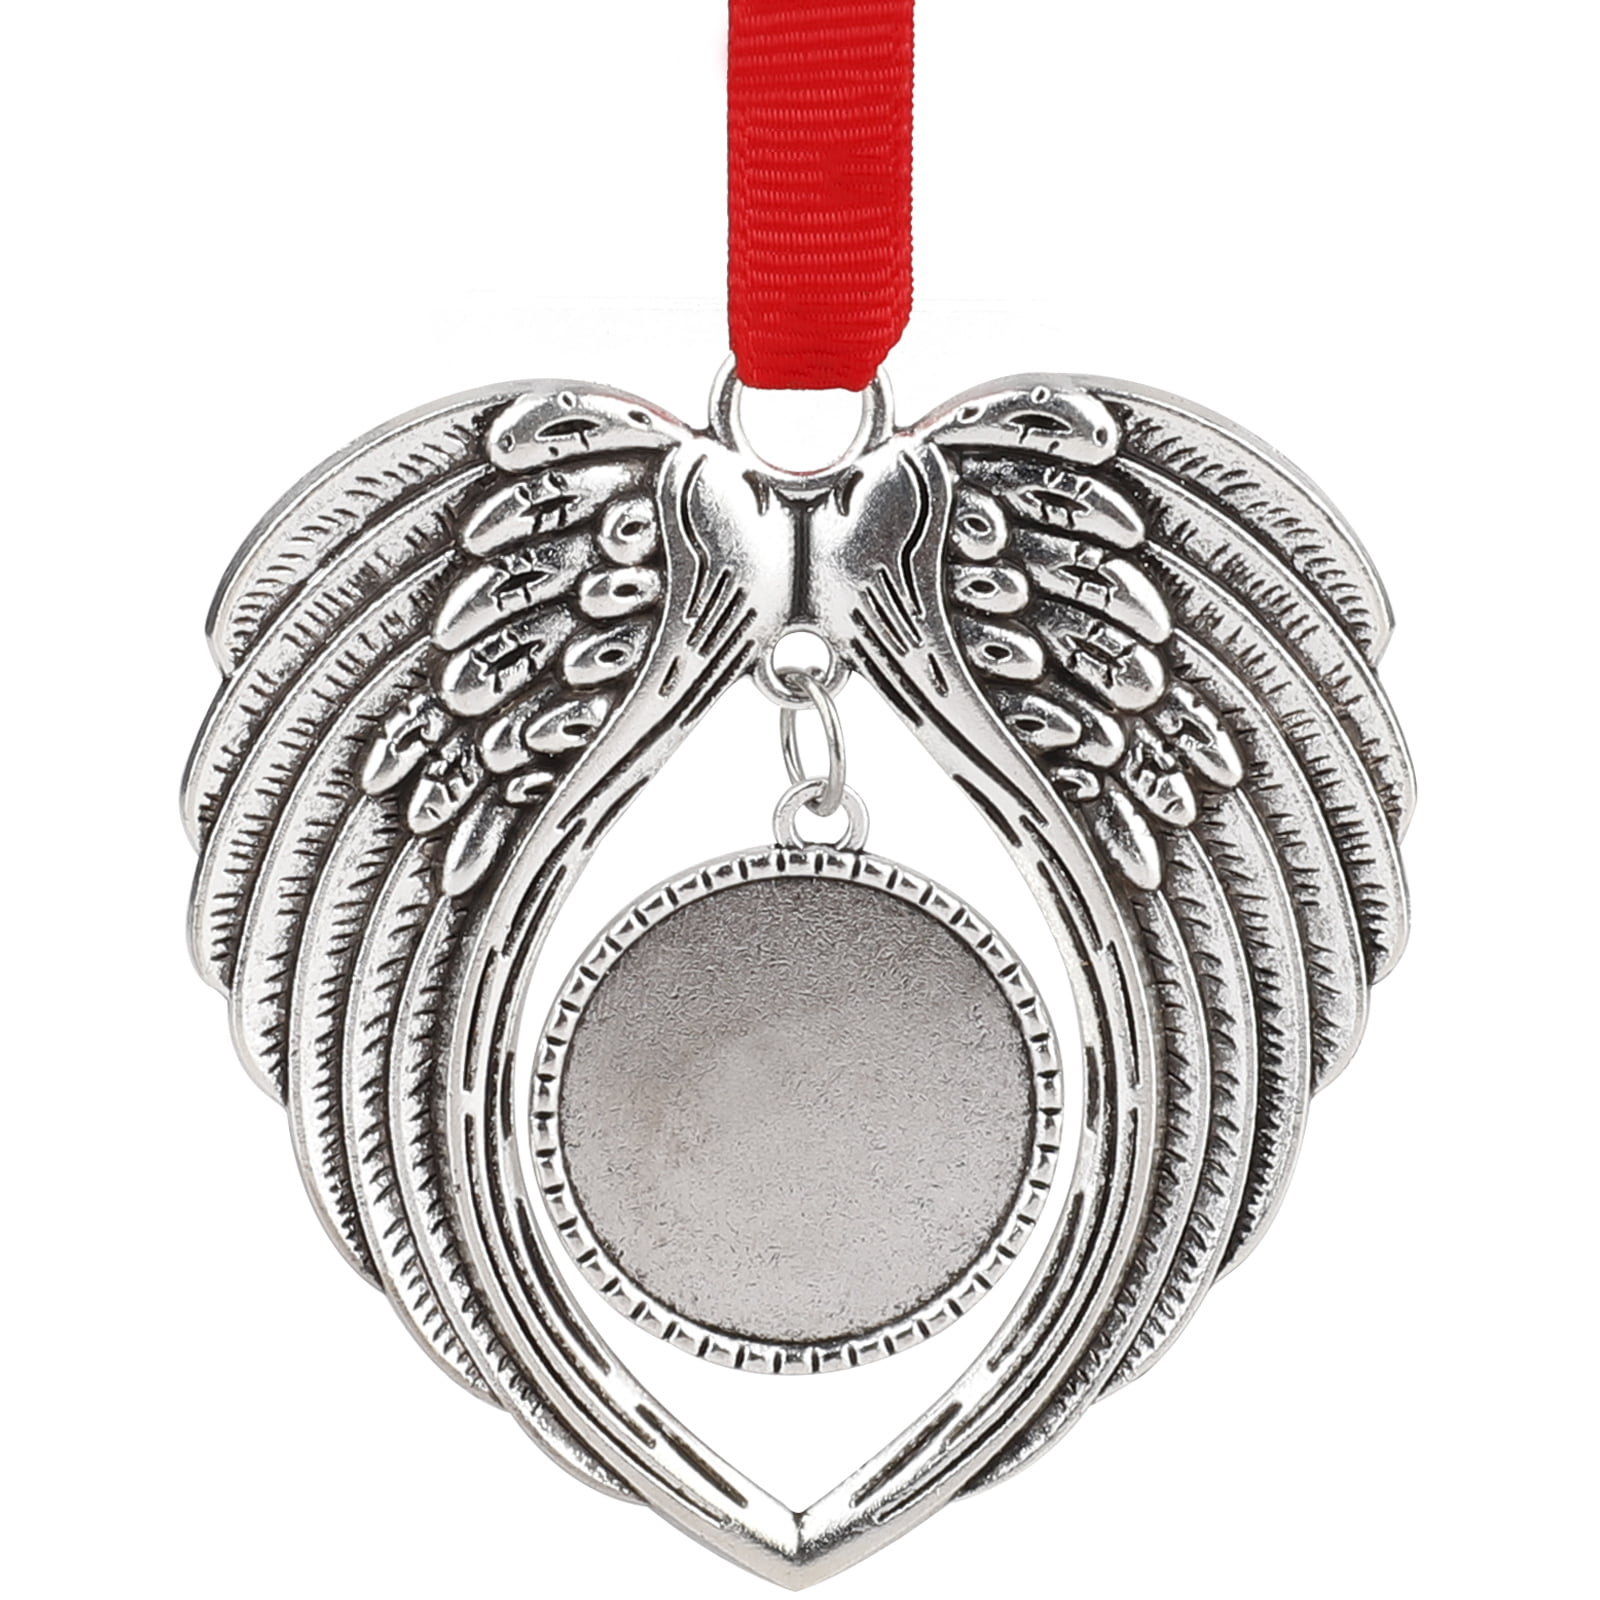 In memory Angel Wing Christmas tree ornament photo locket charm decoration gift